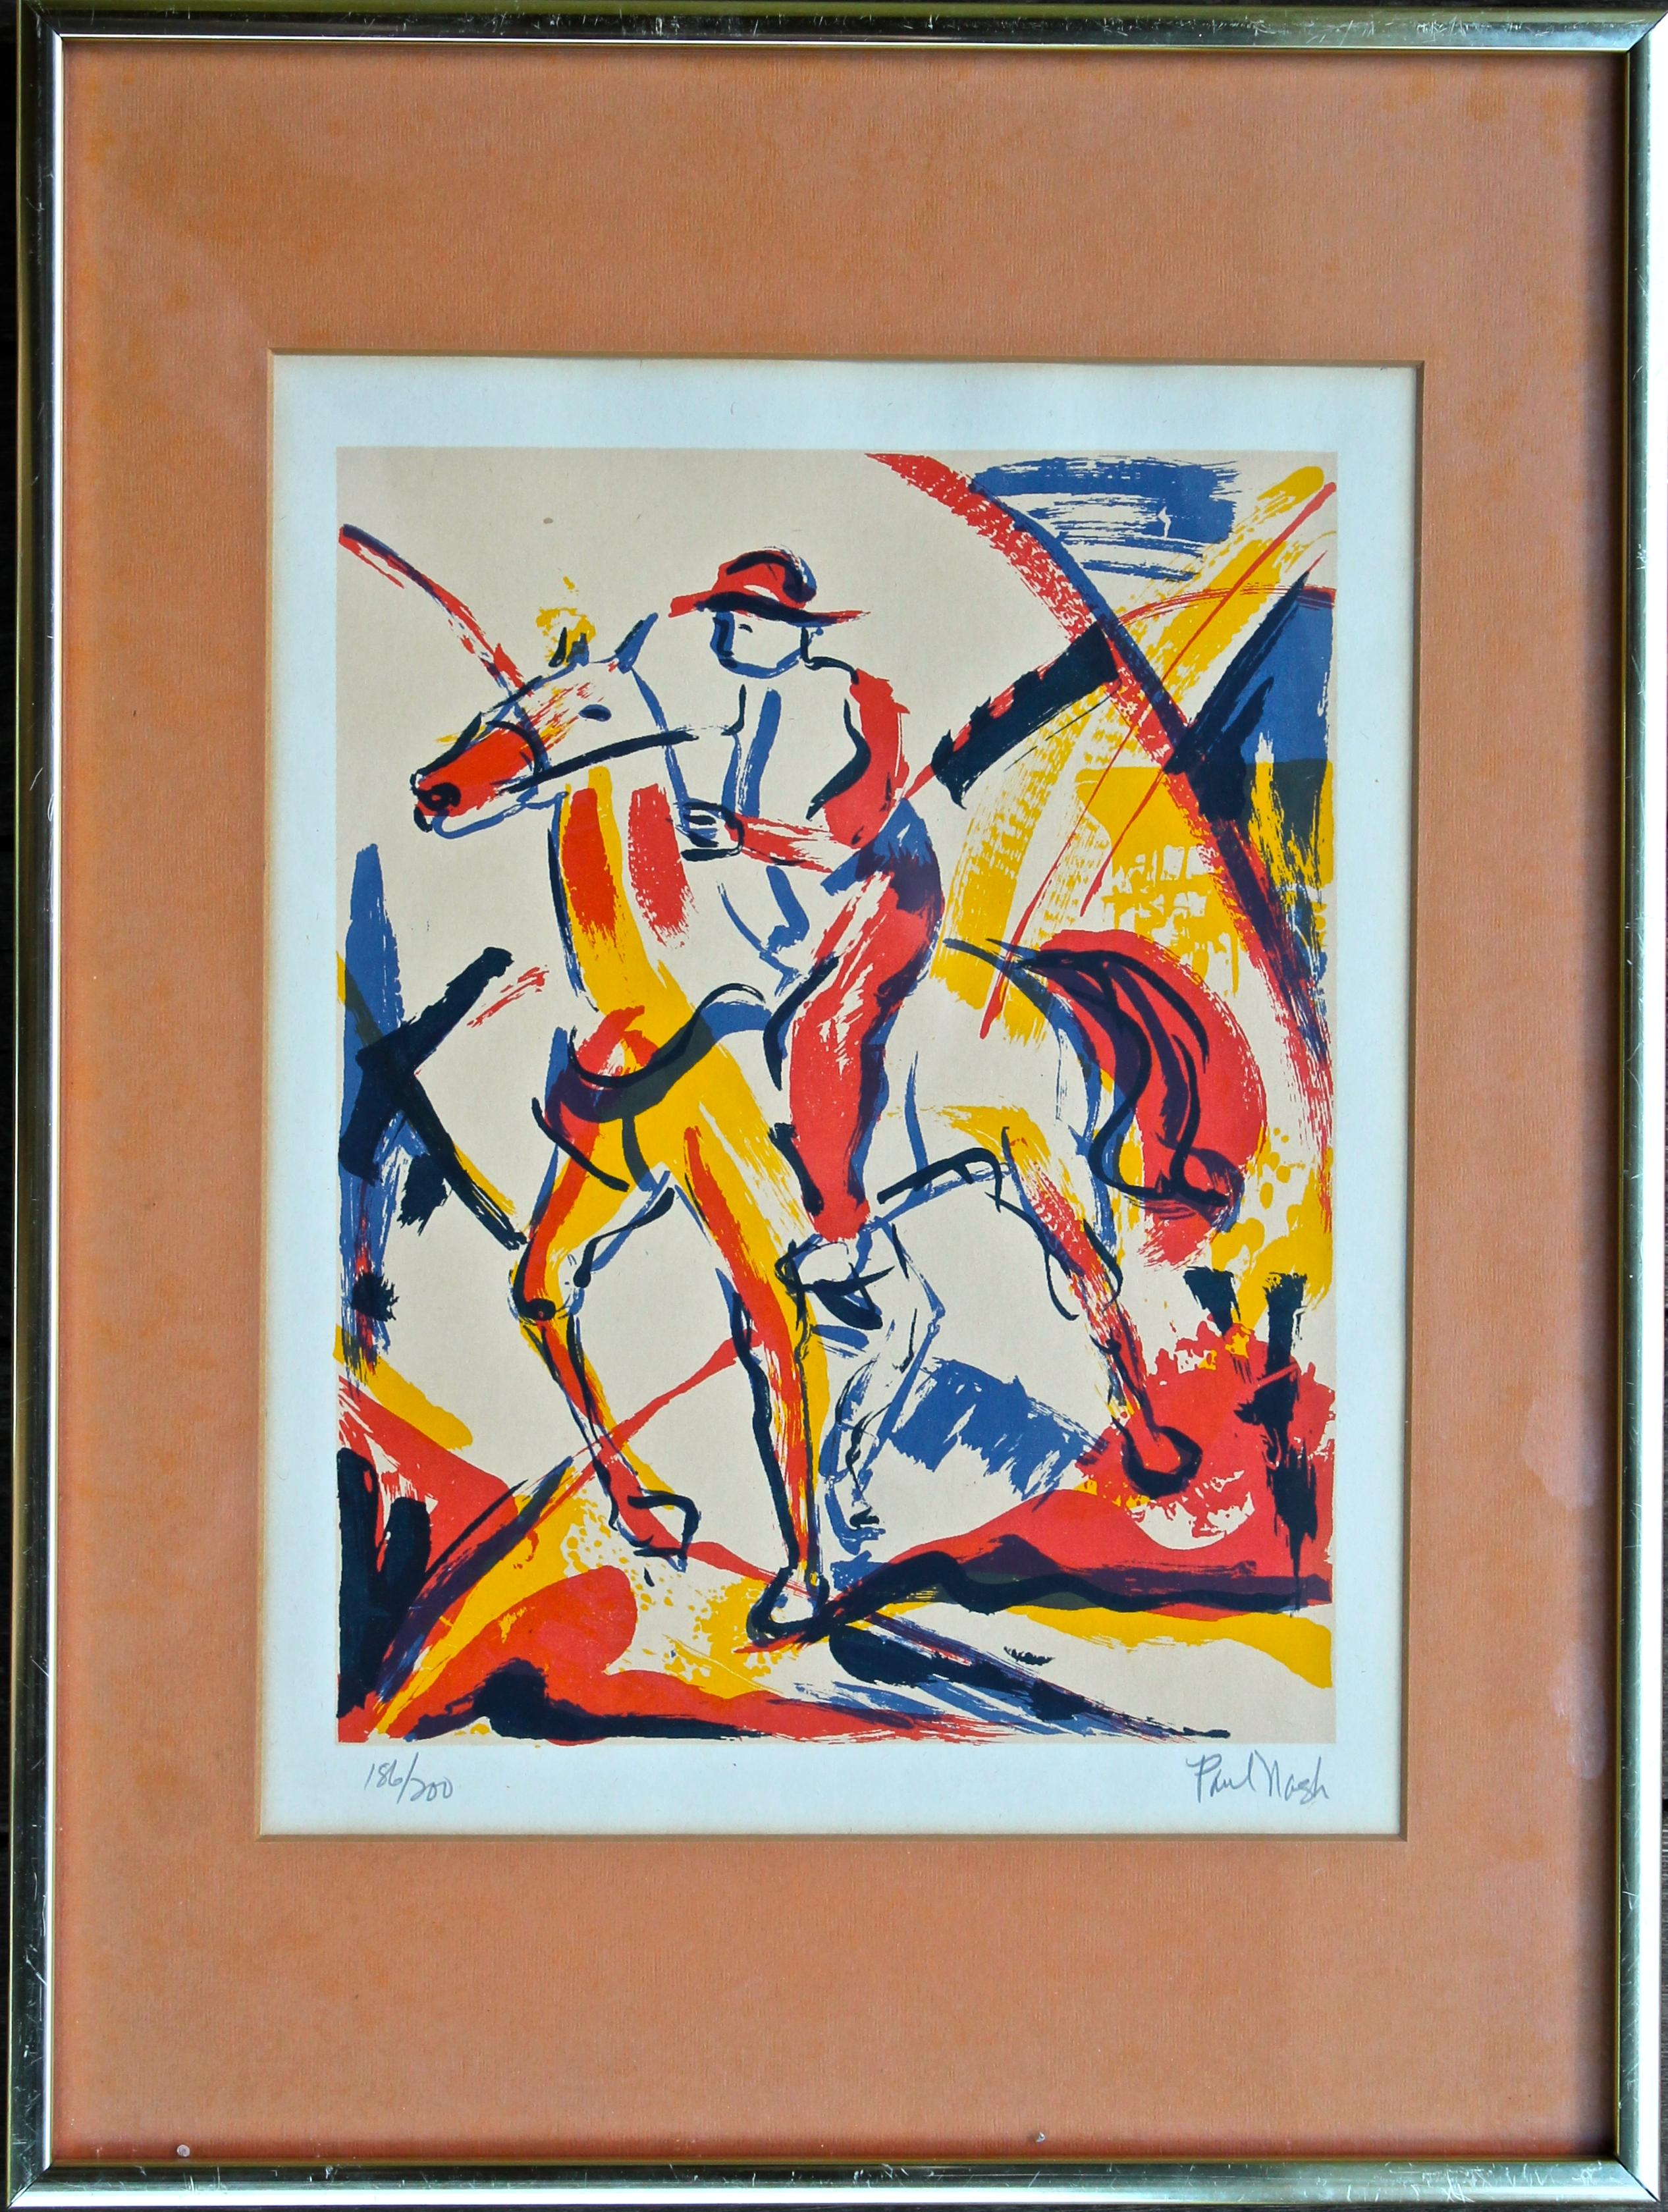 Colorful abstract lithograph of a galloping horse and rider with Vorticism overtones, by the English Artist and Printmaker Paul Nash . Signed lower right and numbered lower left 186/200. Measures: Framed 16 x 12